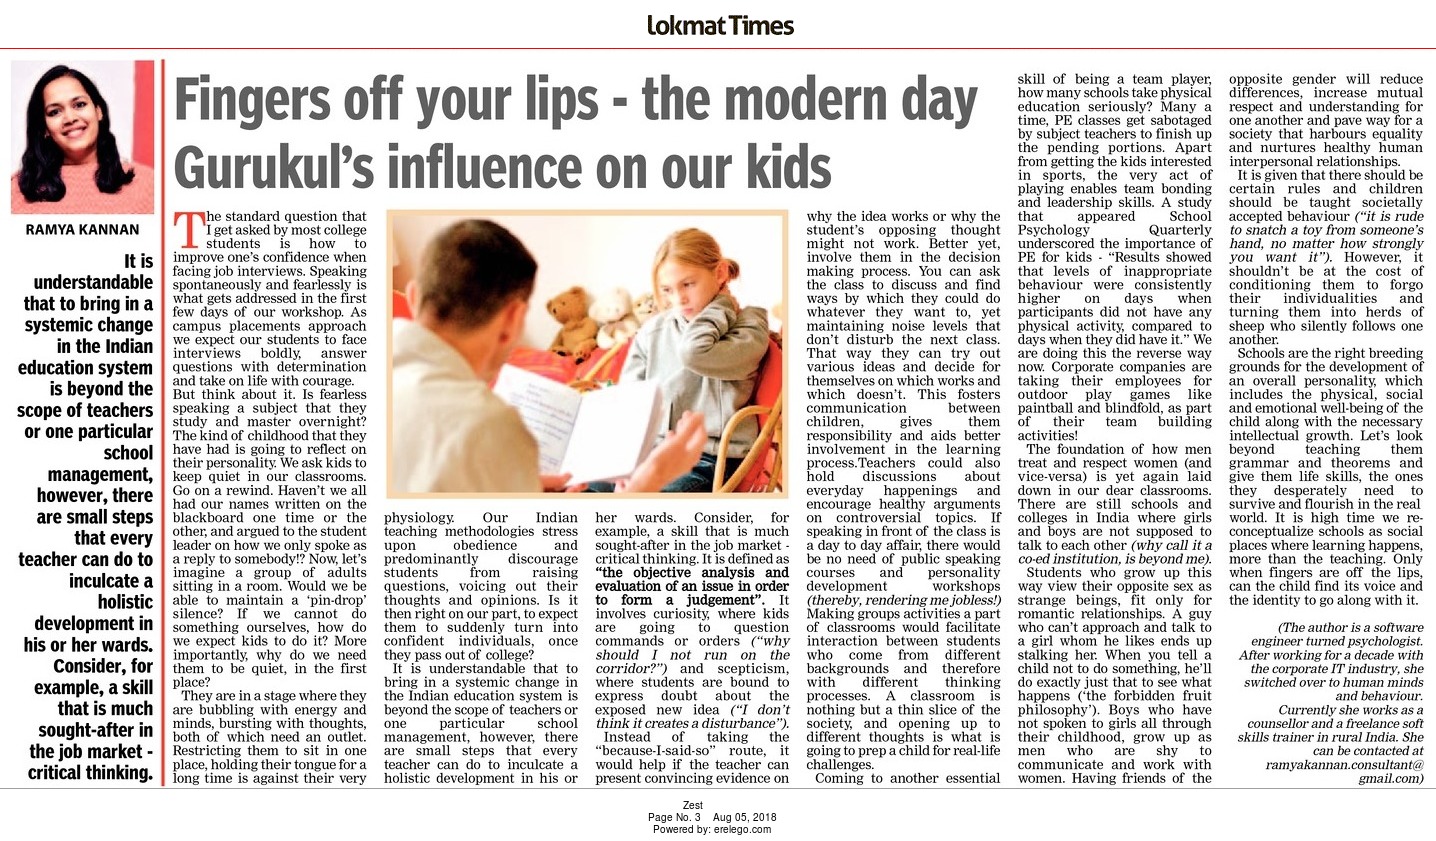 Fingers off your Lips -the modern day Gurukul's influence on our kids